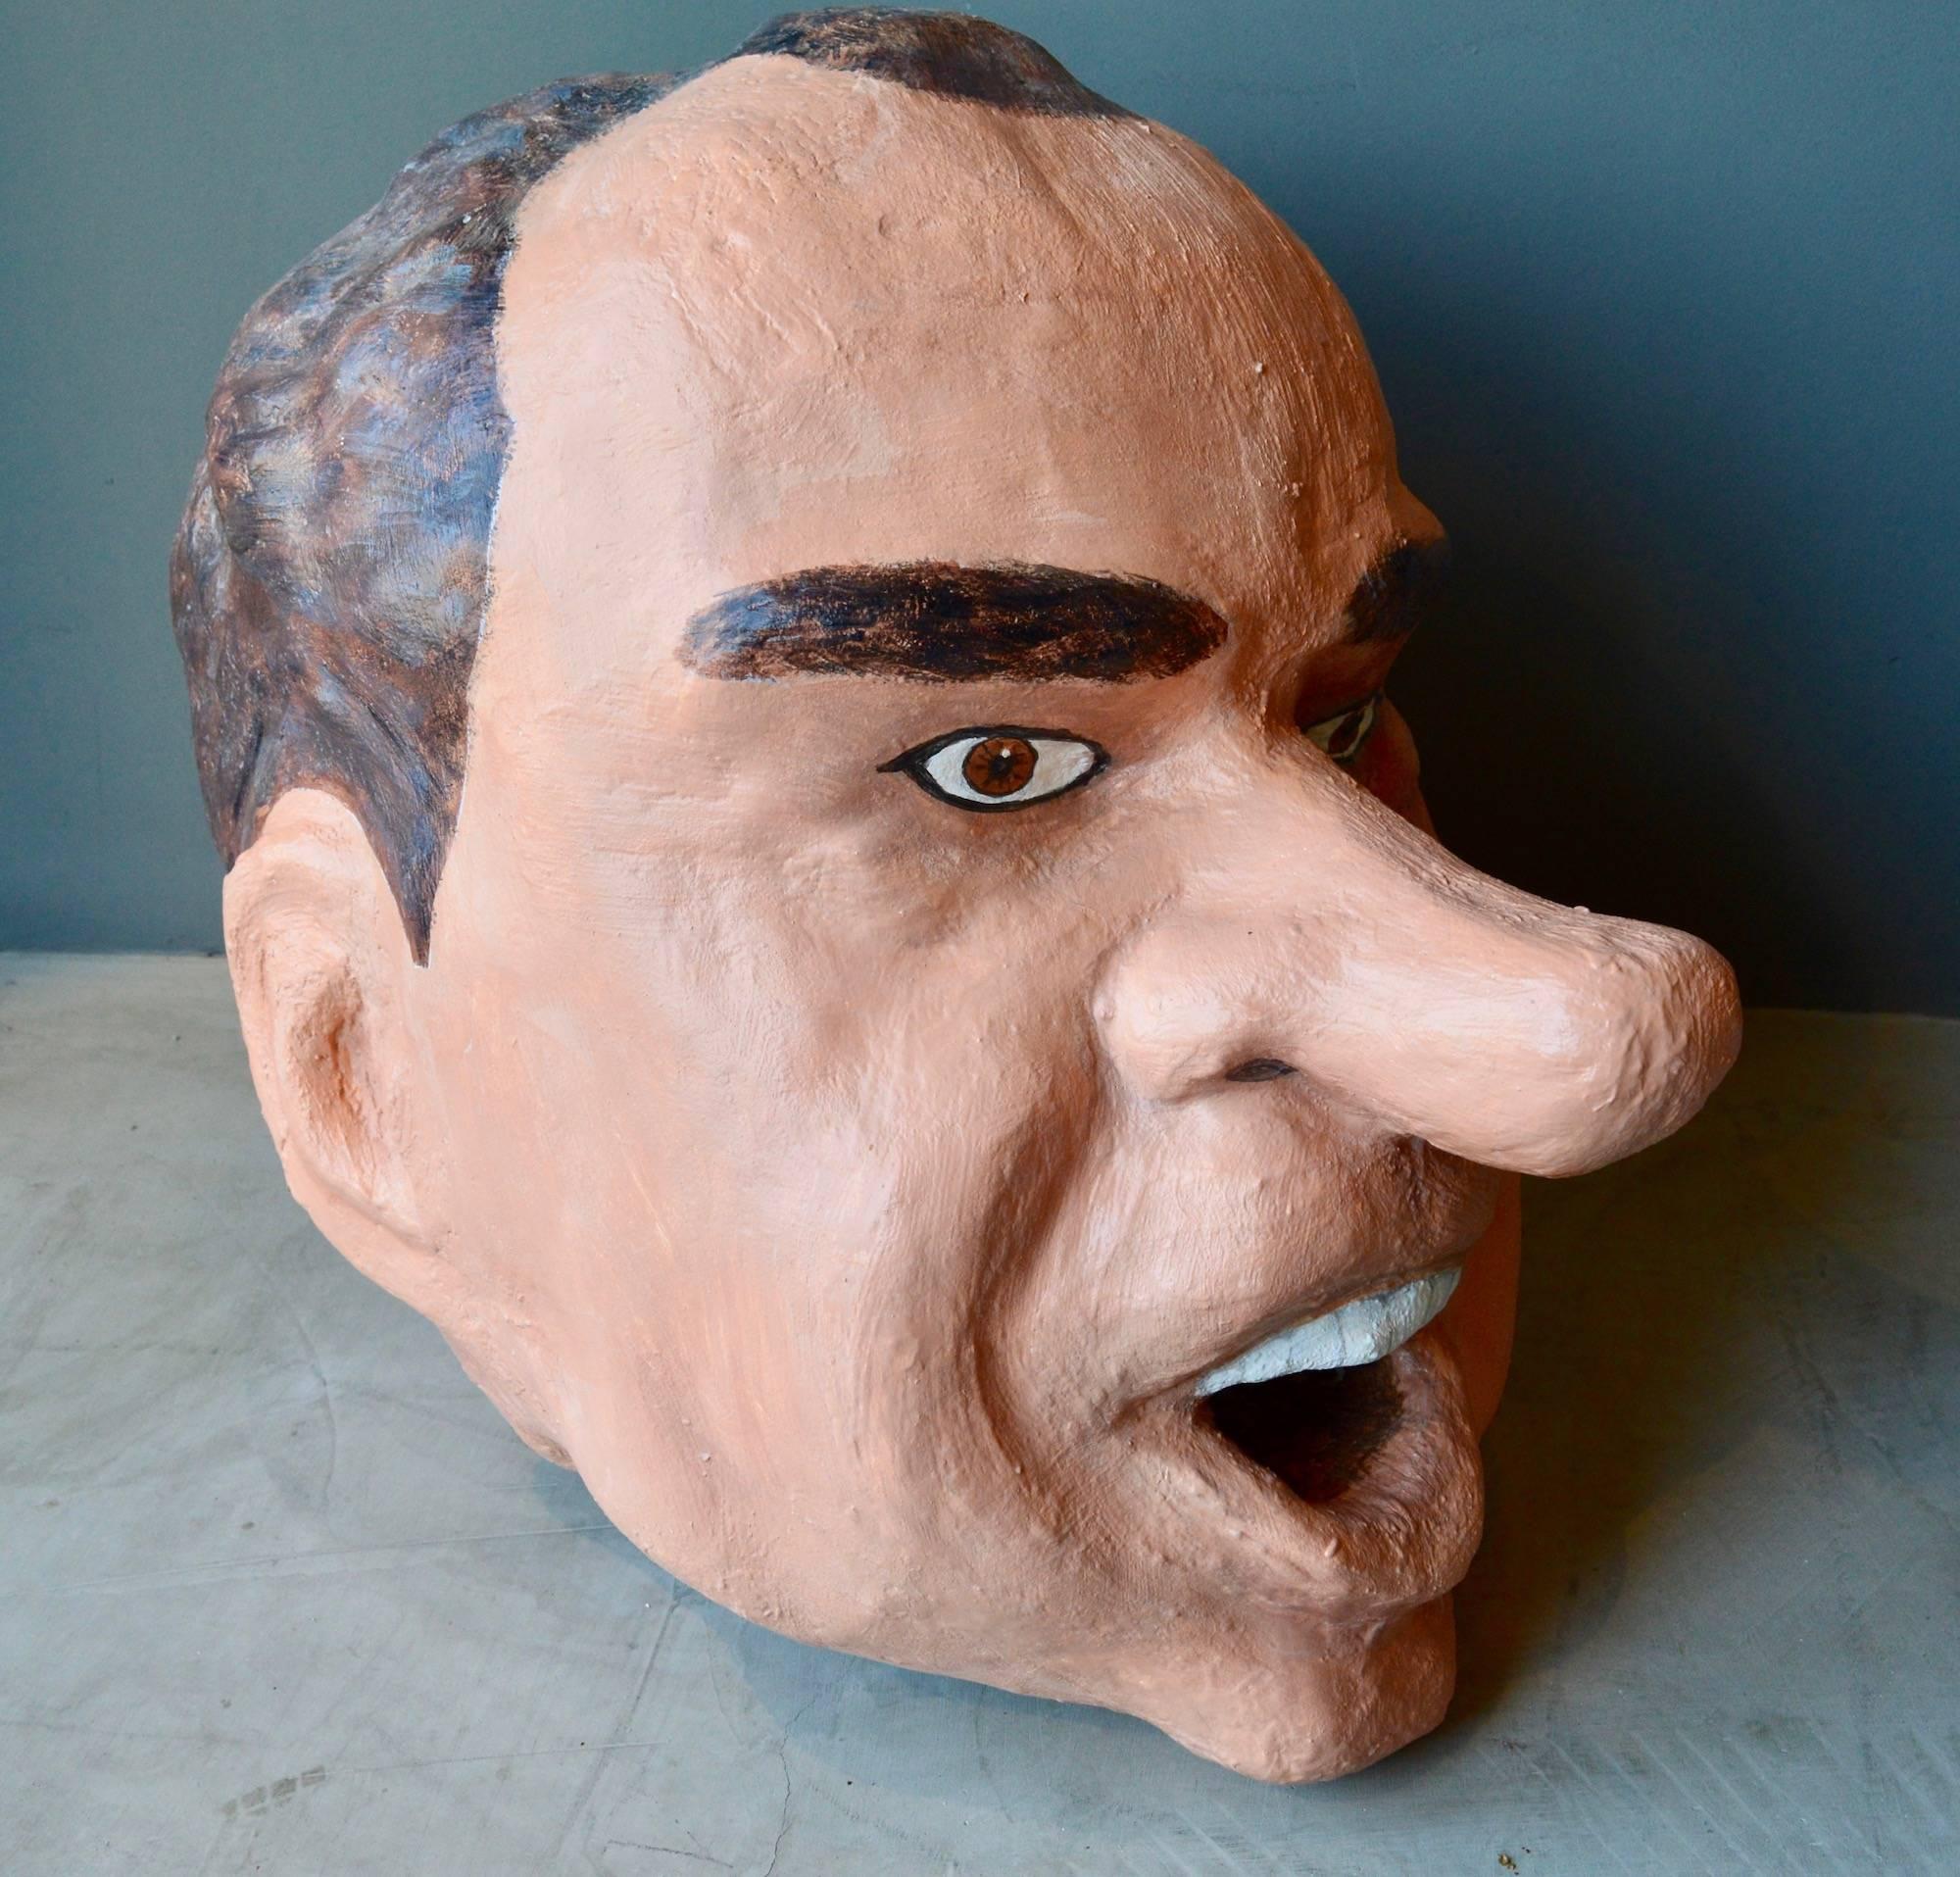 Monumental sculptural head of President Richard Nixon. Made out of foam, paste and hand-painted. Able to be worn on the head. Looks great as a free floating sculpture. Presidents Clinton, Kennedy and George Bush also available. Very unique object.